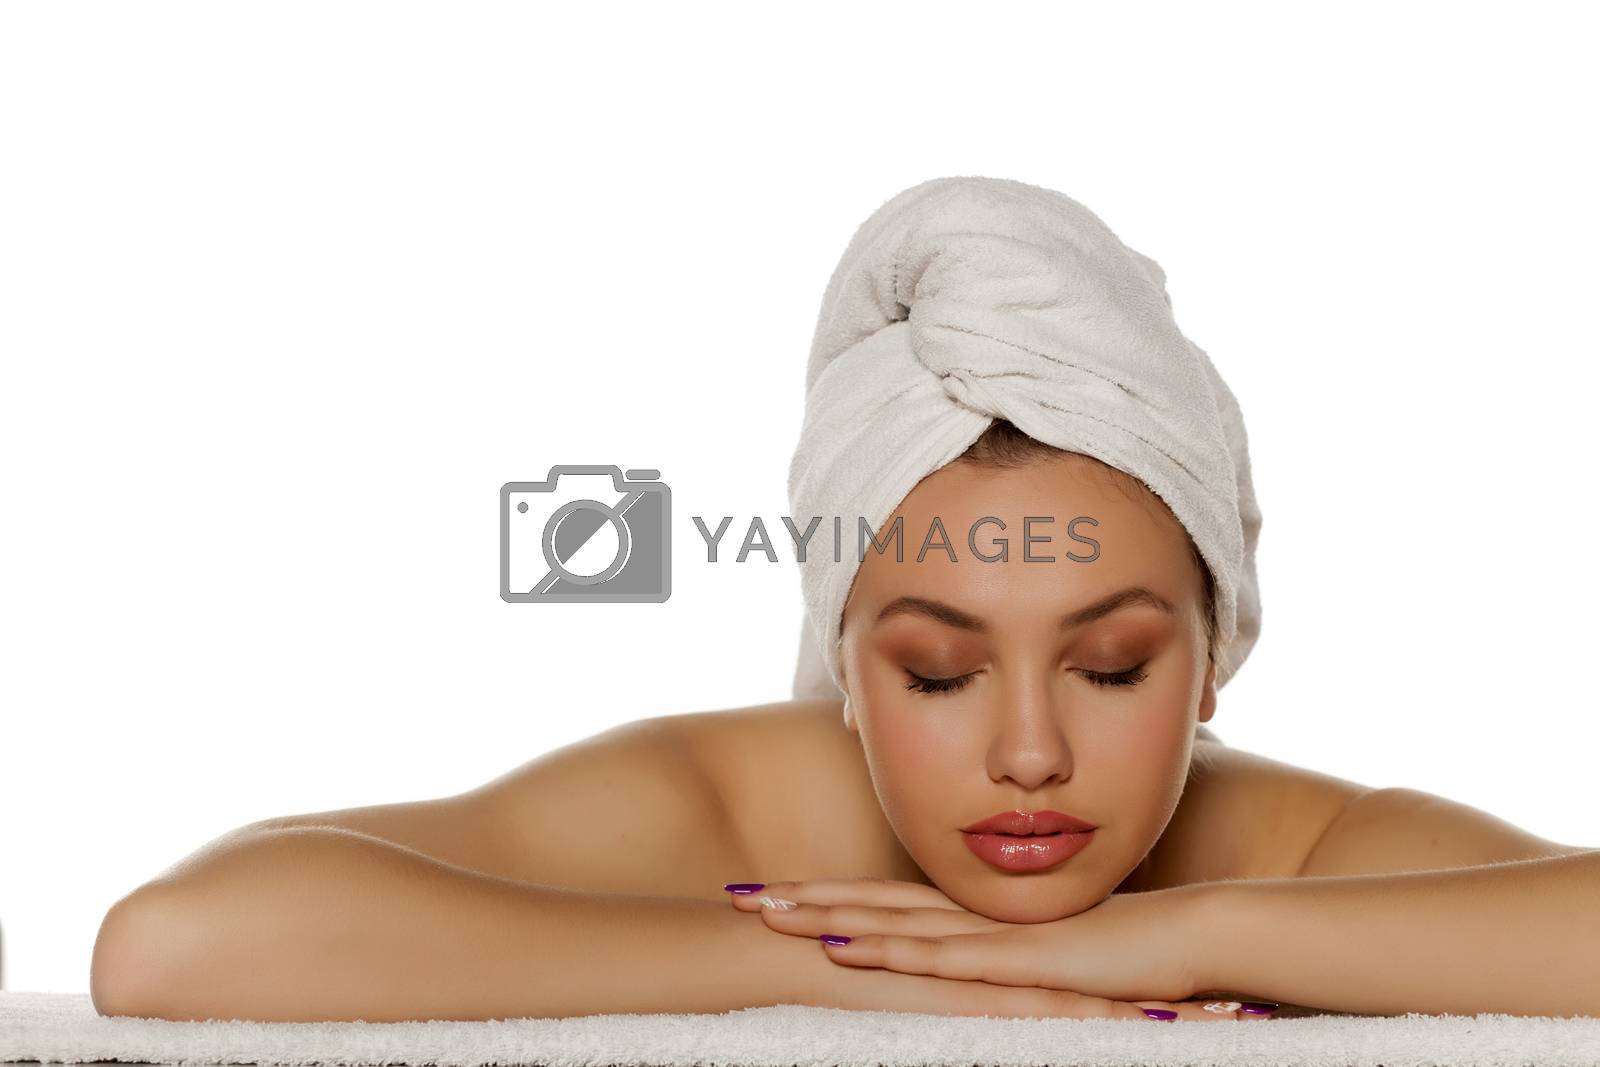 Royalty free image of beautiful young woman lying down on her hands by Vladimirfloyd